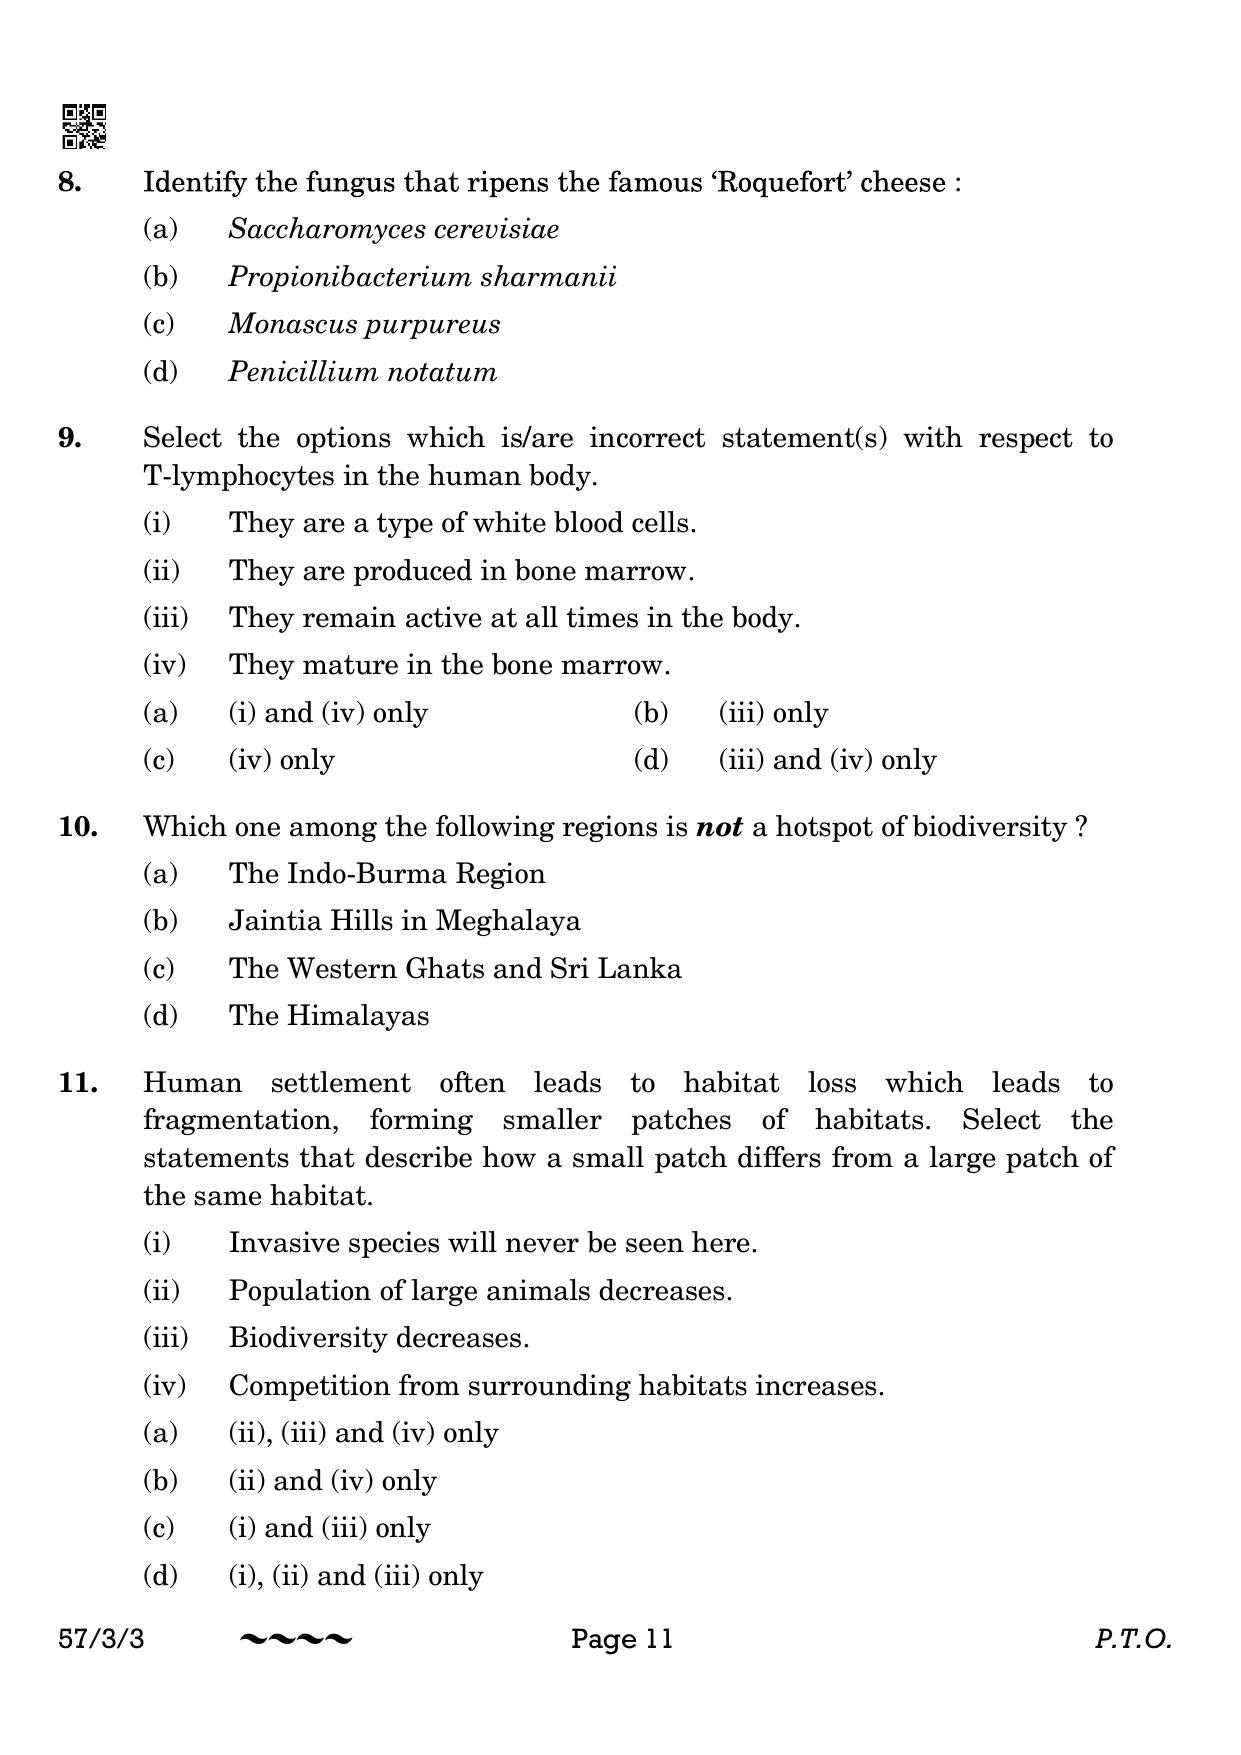 CBSE Class 12 57-3-3 Biology 2023 Question Paper - Page 11